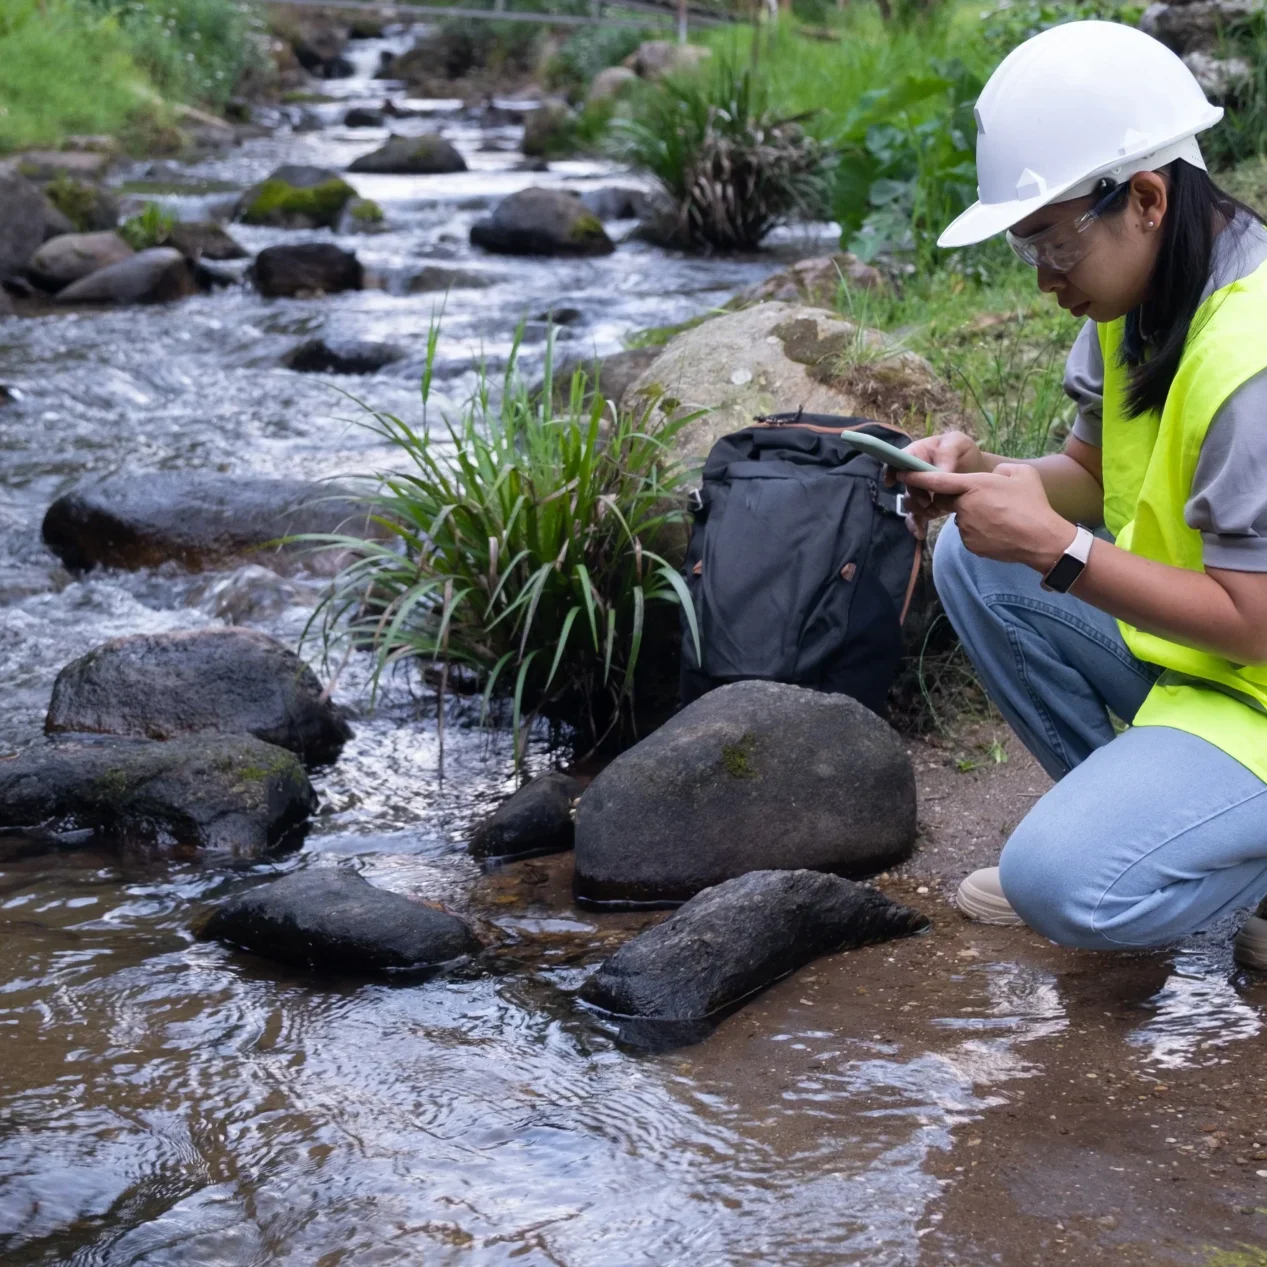 Water engineer with survey equipment kneeling by a stream collecting data